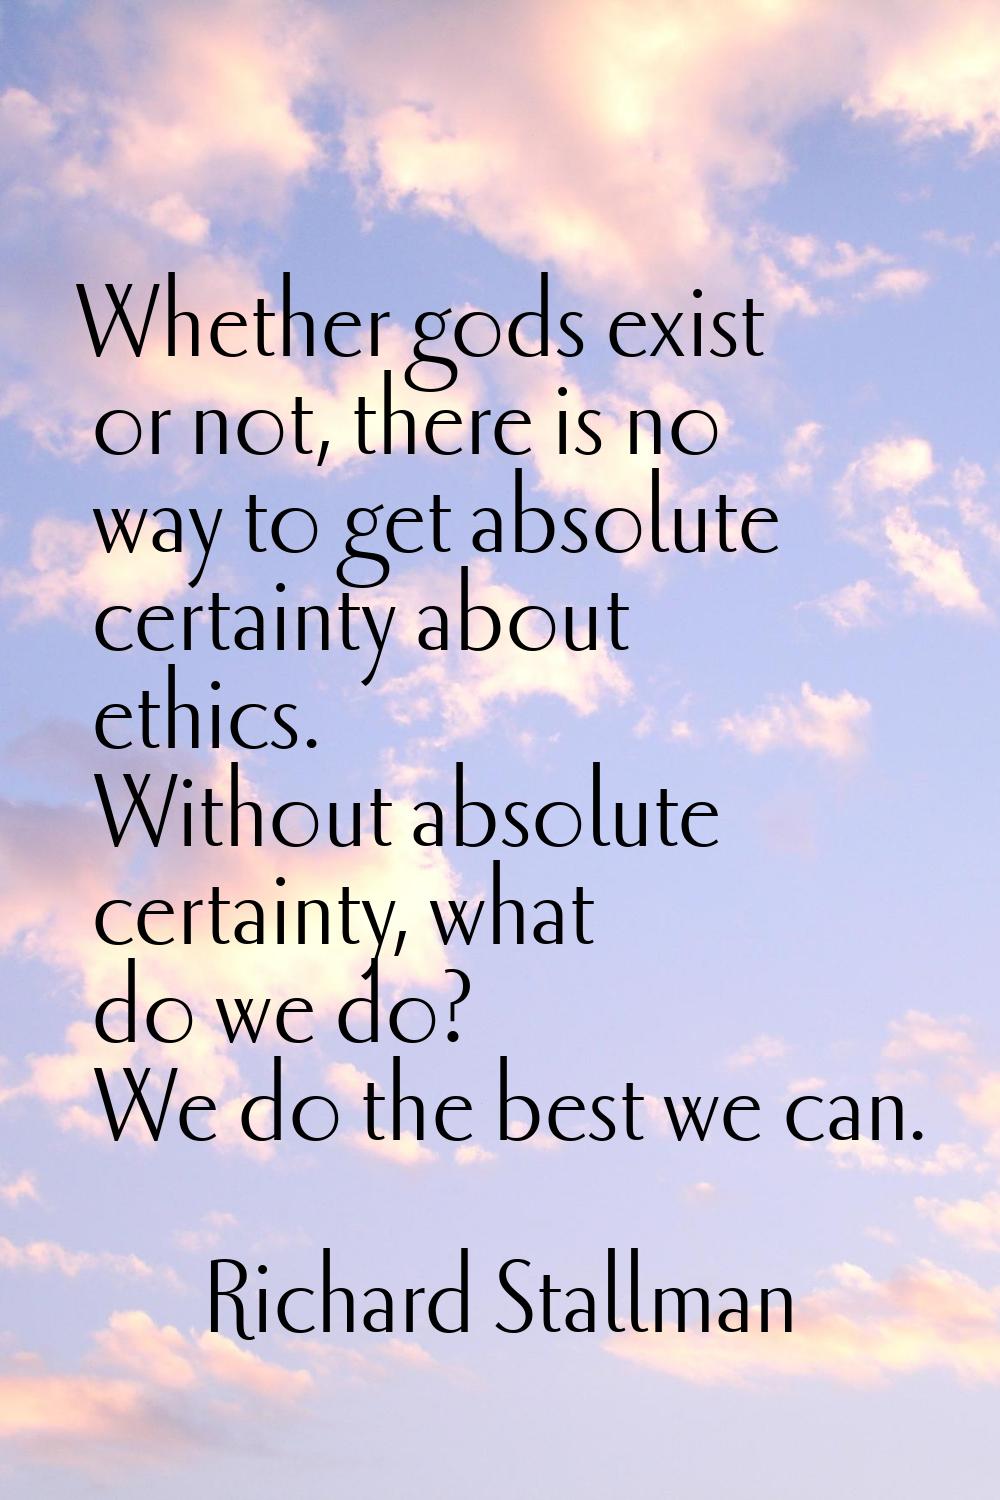 Whether gods exist or not, there is no way to get absolute certainty about ethics. Without absolute